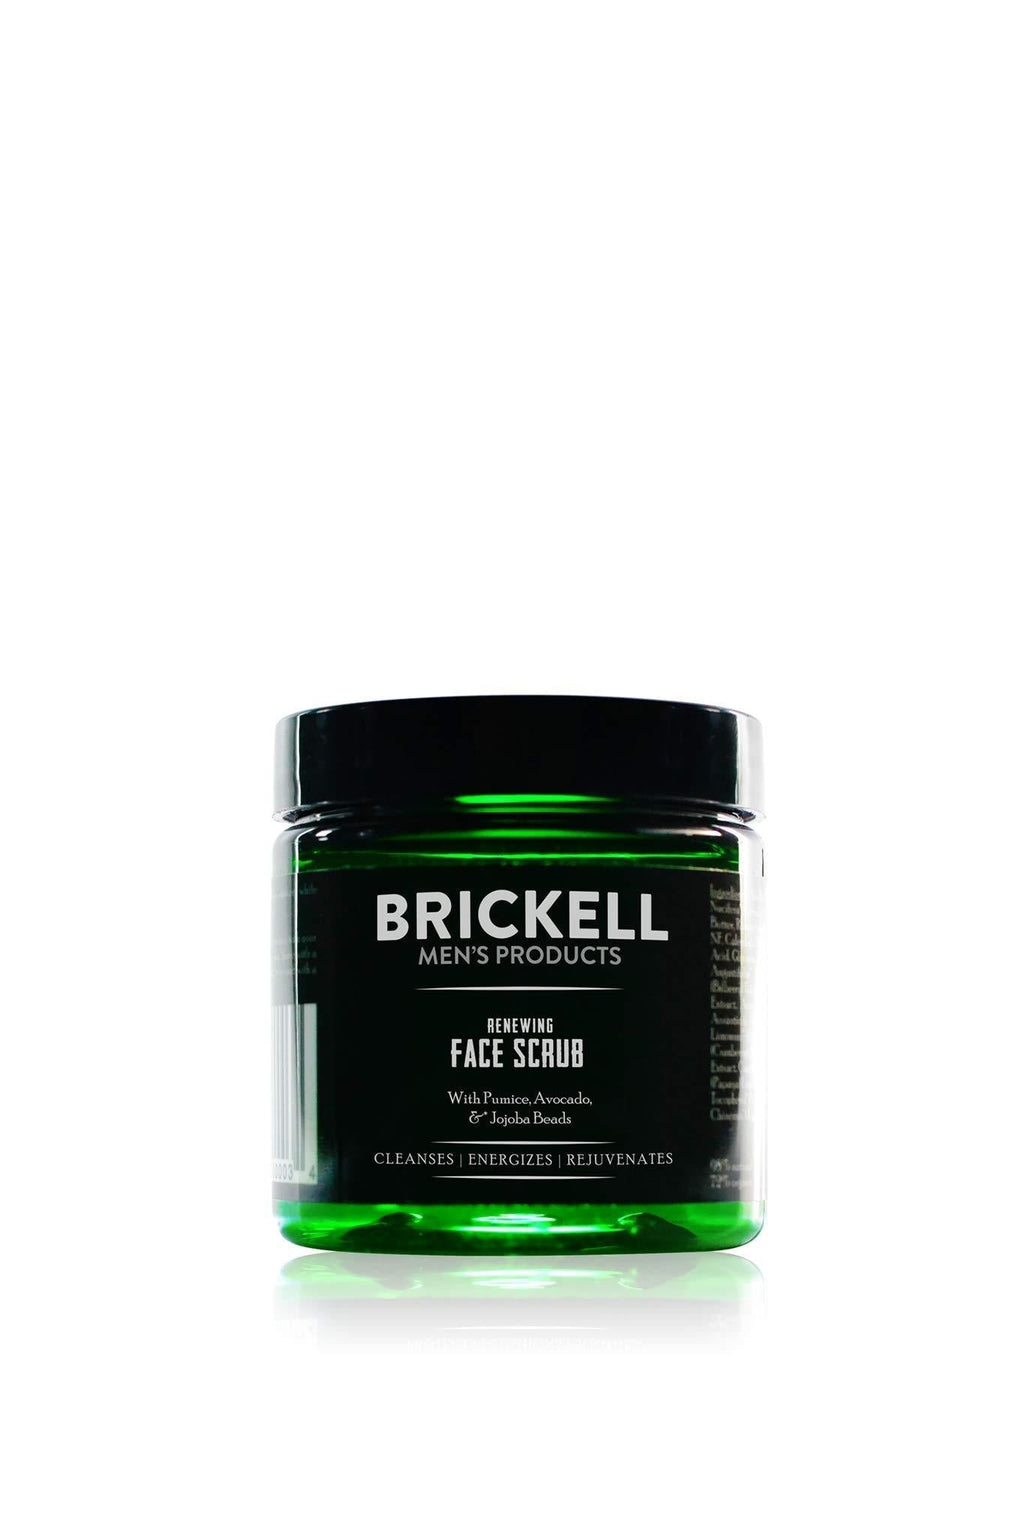 [Australia] - Brickell Men's Renewing Face Scrub for Men, Natural and Organic Deep Exfoliating Facial Scrub Formulated with Jojoba Beads, Coffee Extract and Pumice, 2 Ounce, Scented 